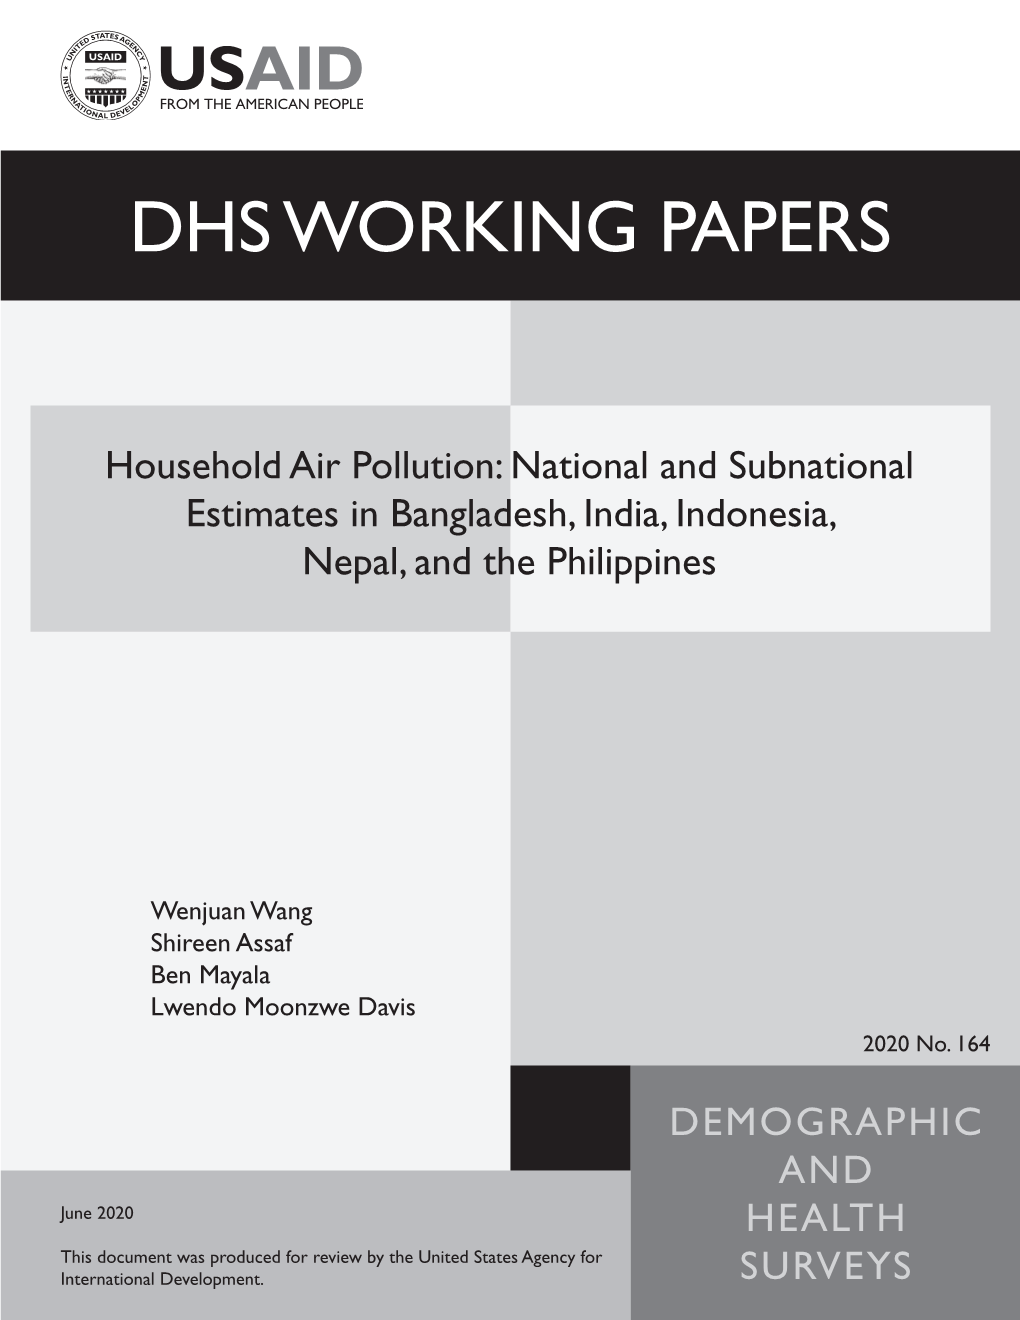 Household Air Pollution: National and Subnational Estimates in Bangladesh, India, Indonesia, Nepal, and the Philippines [WP164]